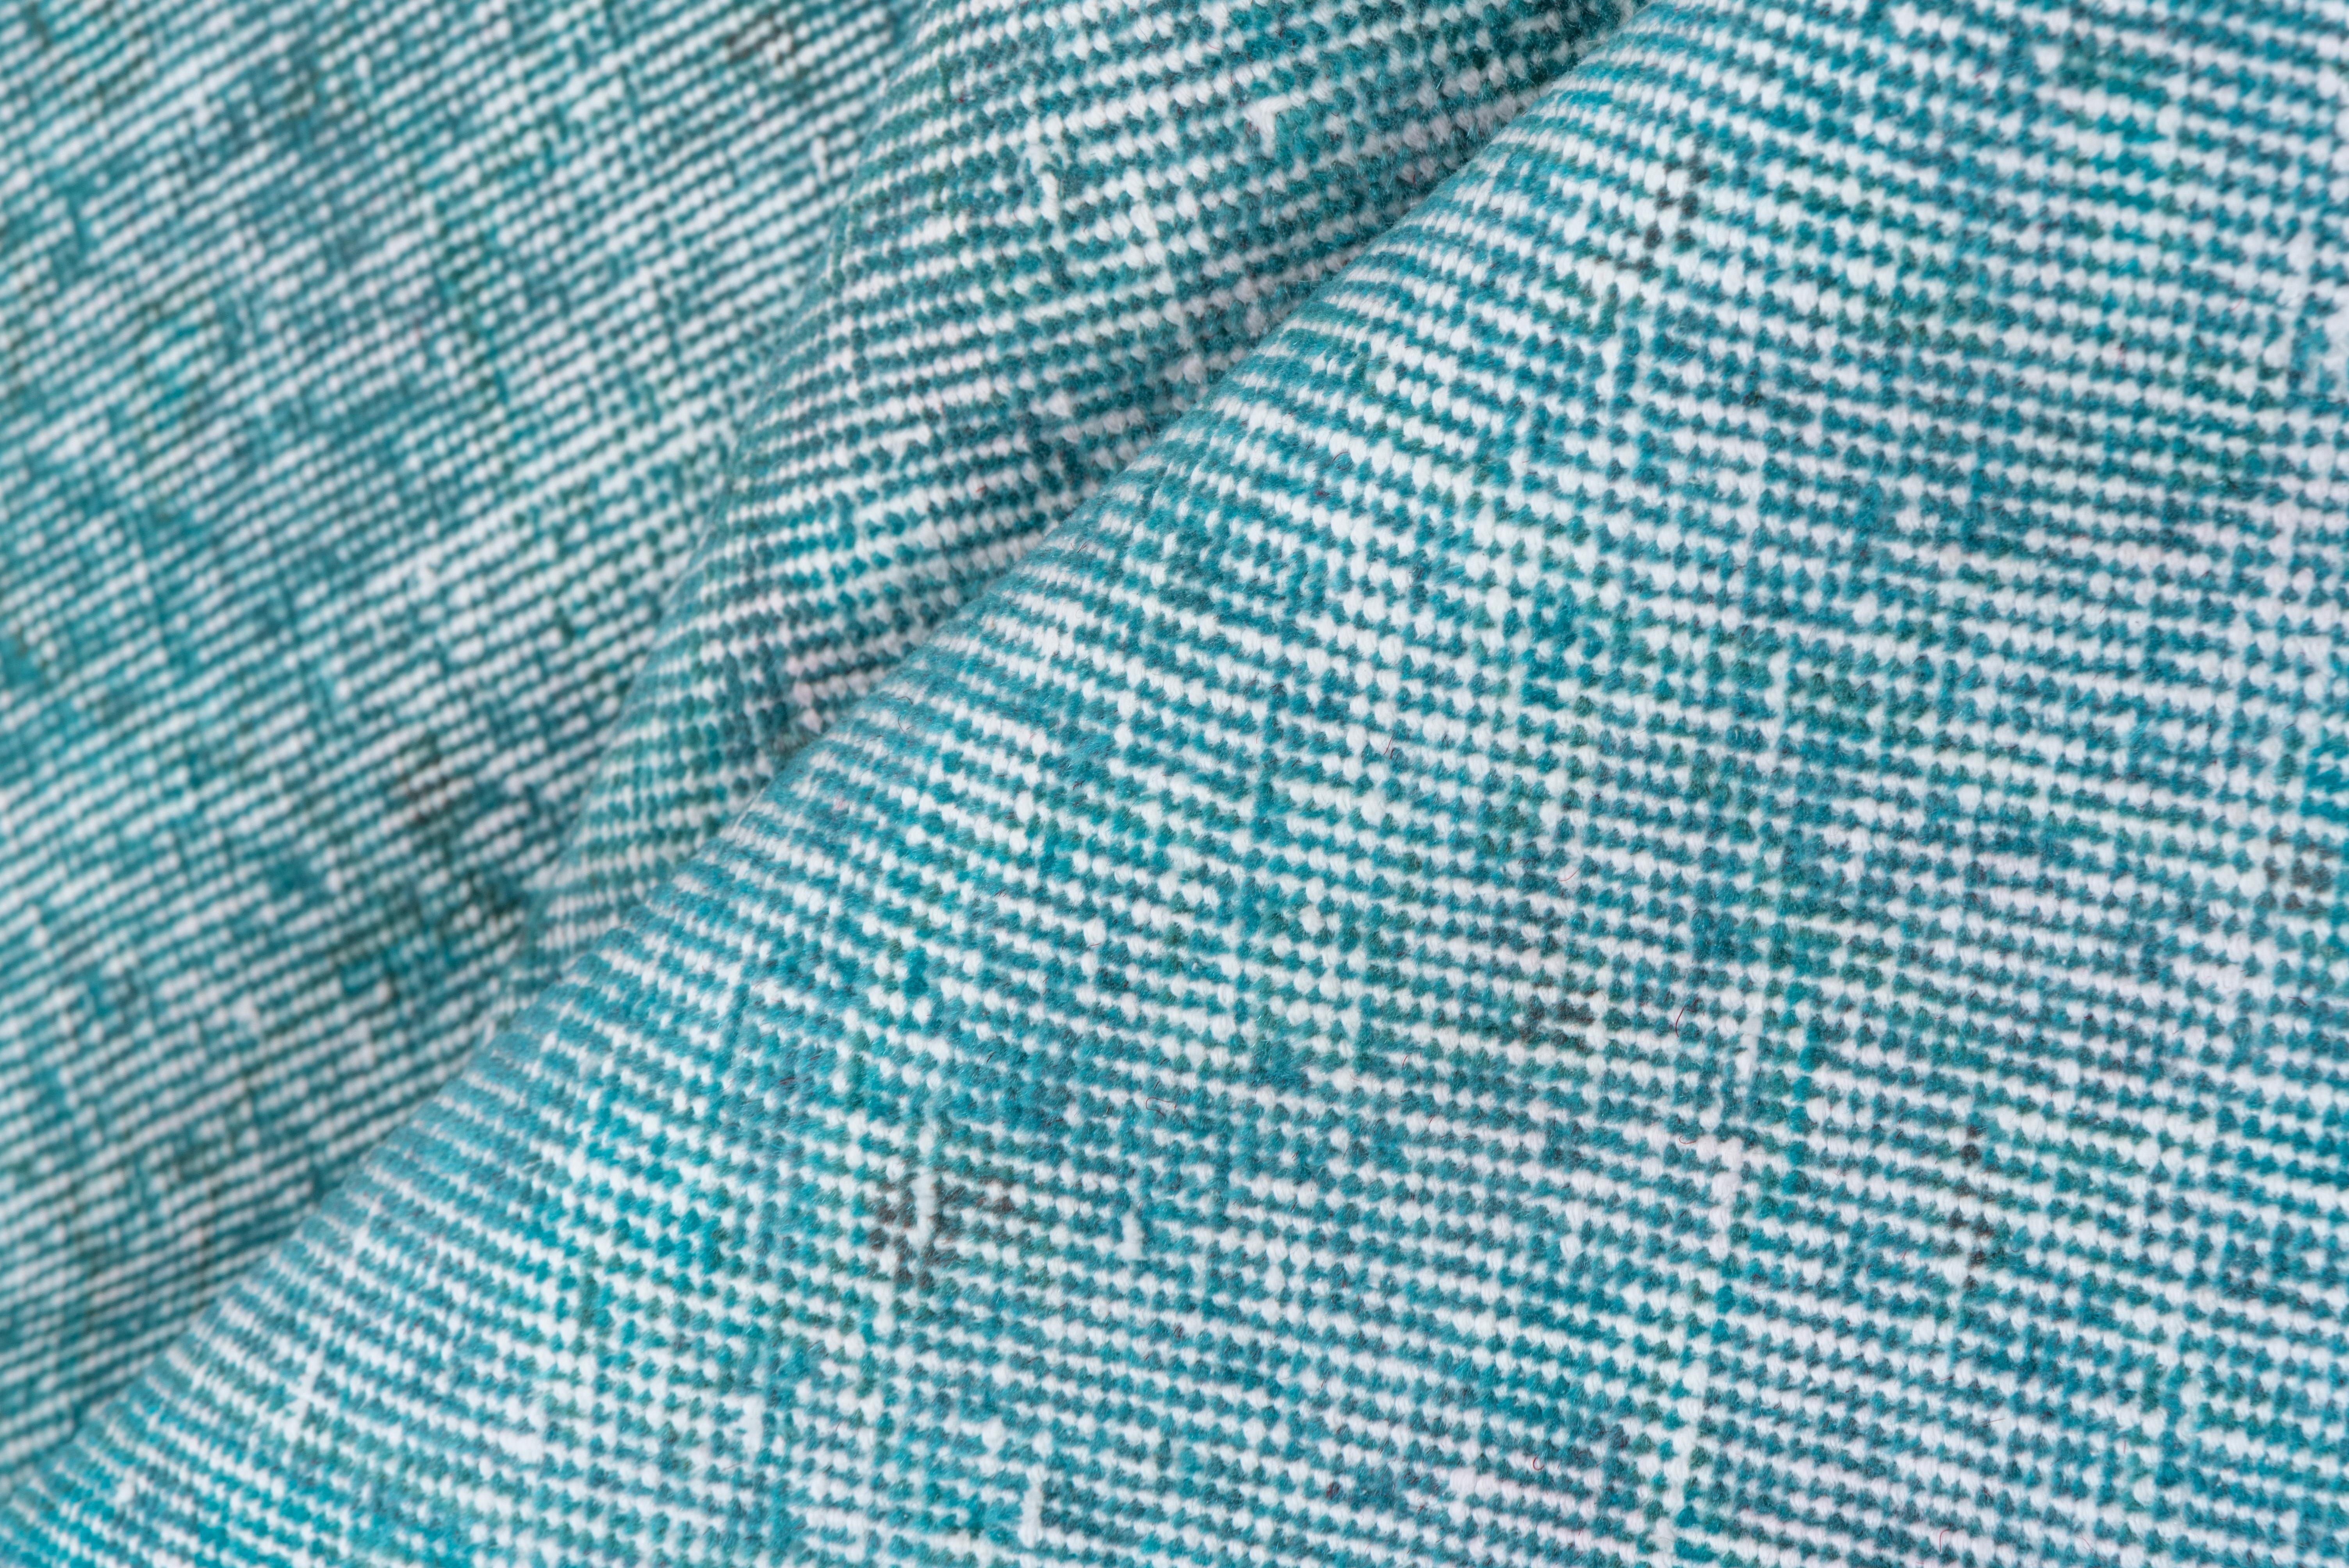 This bright turquoise Turkish overdyed carpet has a pattern defined by the wear beyond the all-over general distress. Vertical and horizontal off-white strips cross near the center. Shabby chic conditions and can offer some great texture for floor